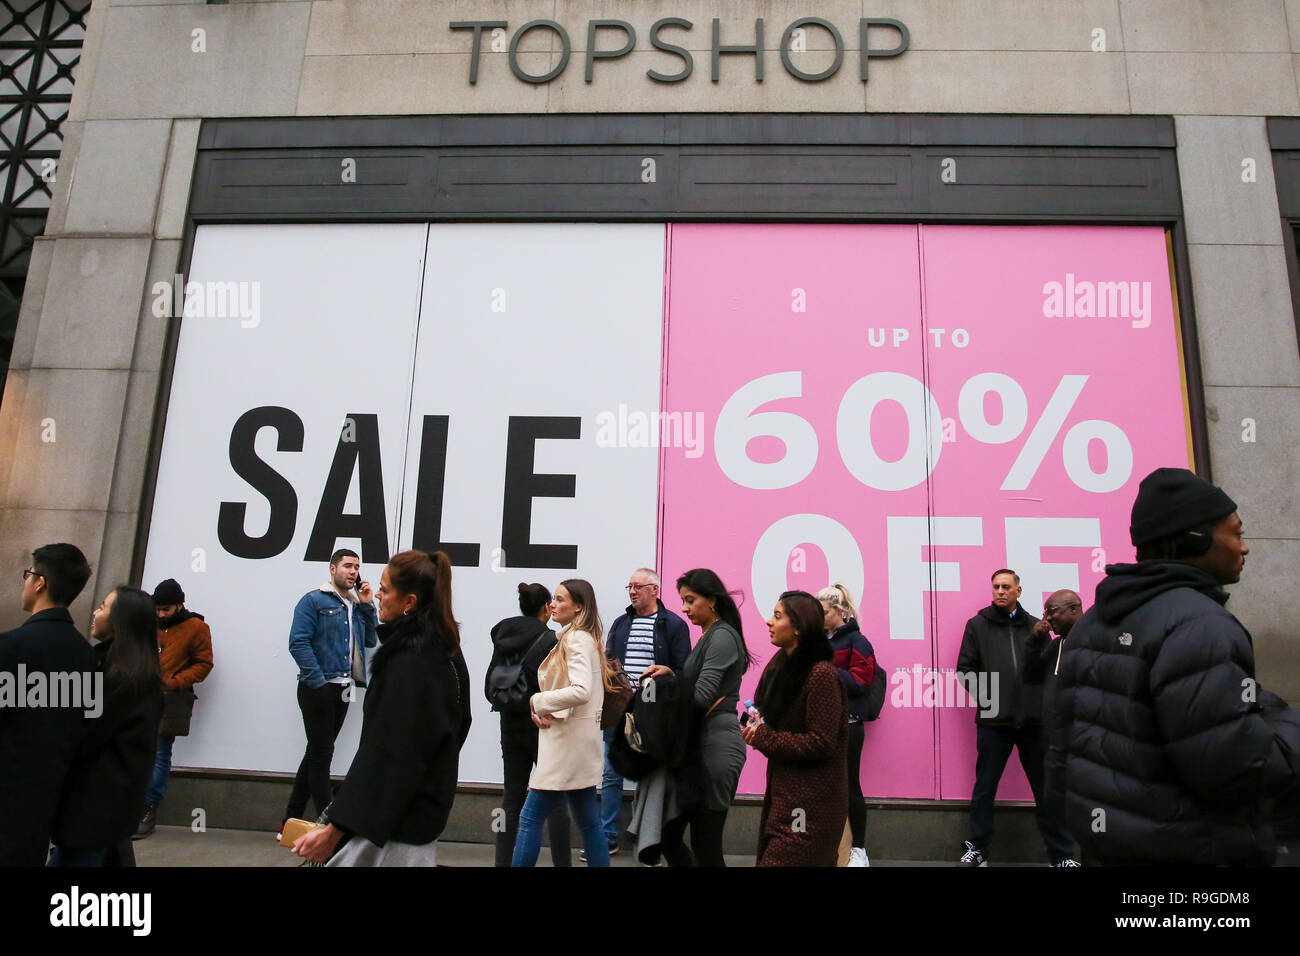 Shoppers are seen standing in front of a large SALE sign at the Topshop  store window on London's Oxford Street. Last minute Christmas shoppers take  advantage of pre-Christmas bargains at Oxford Street